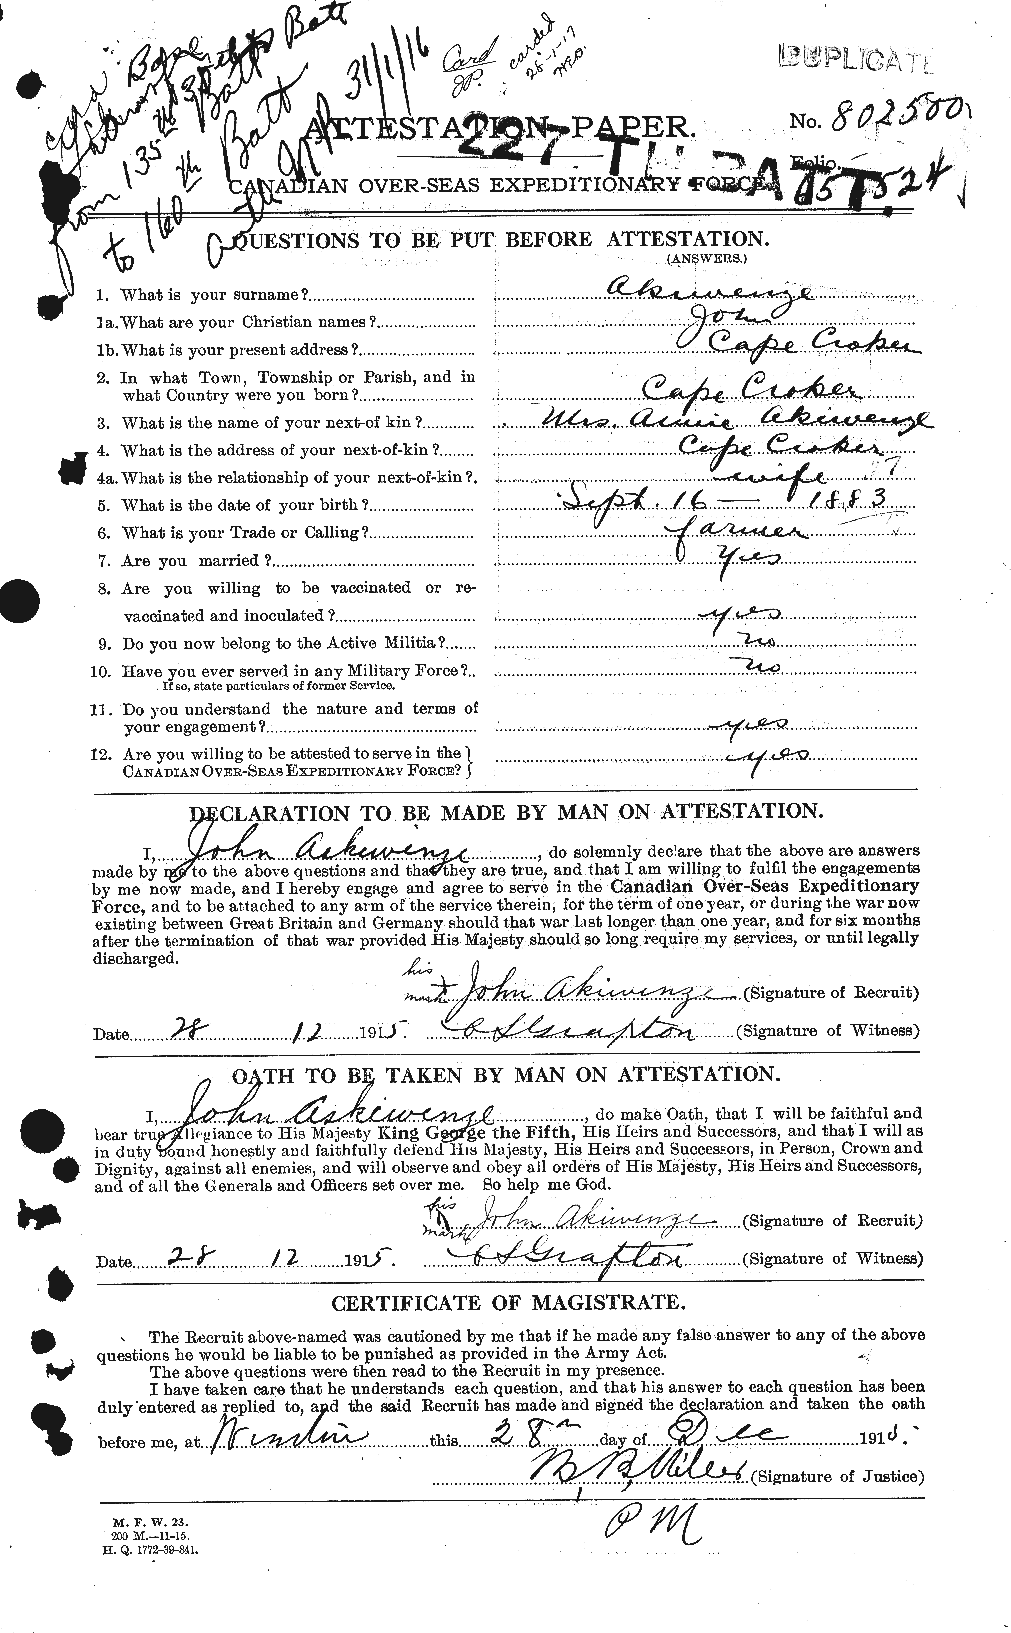 Personnel Records of the First World War - CEF 203590a